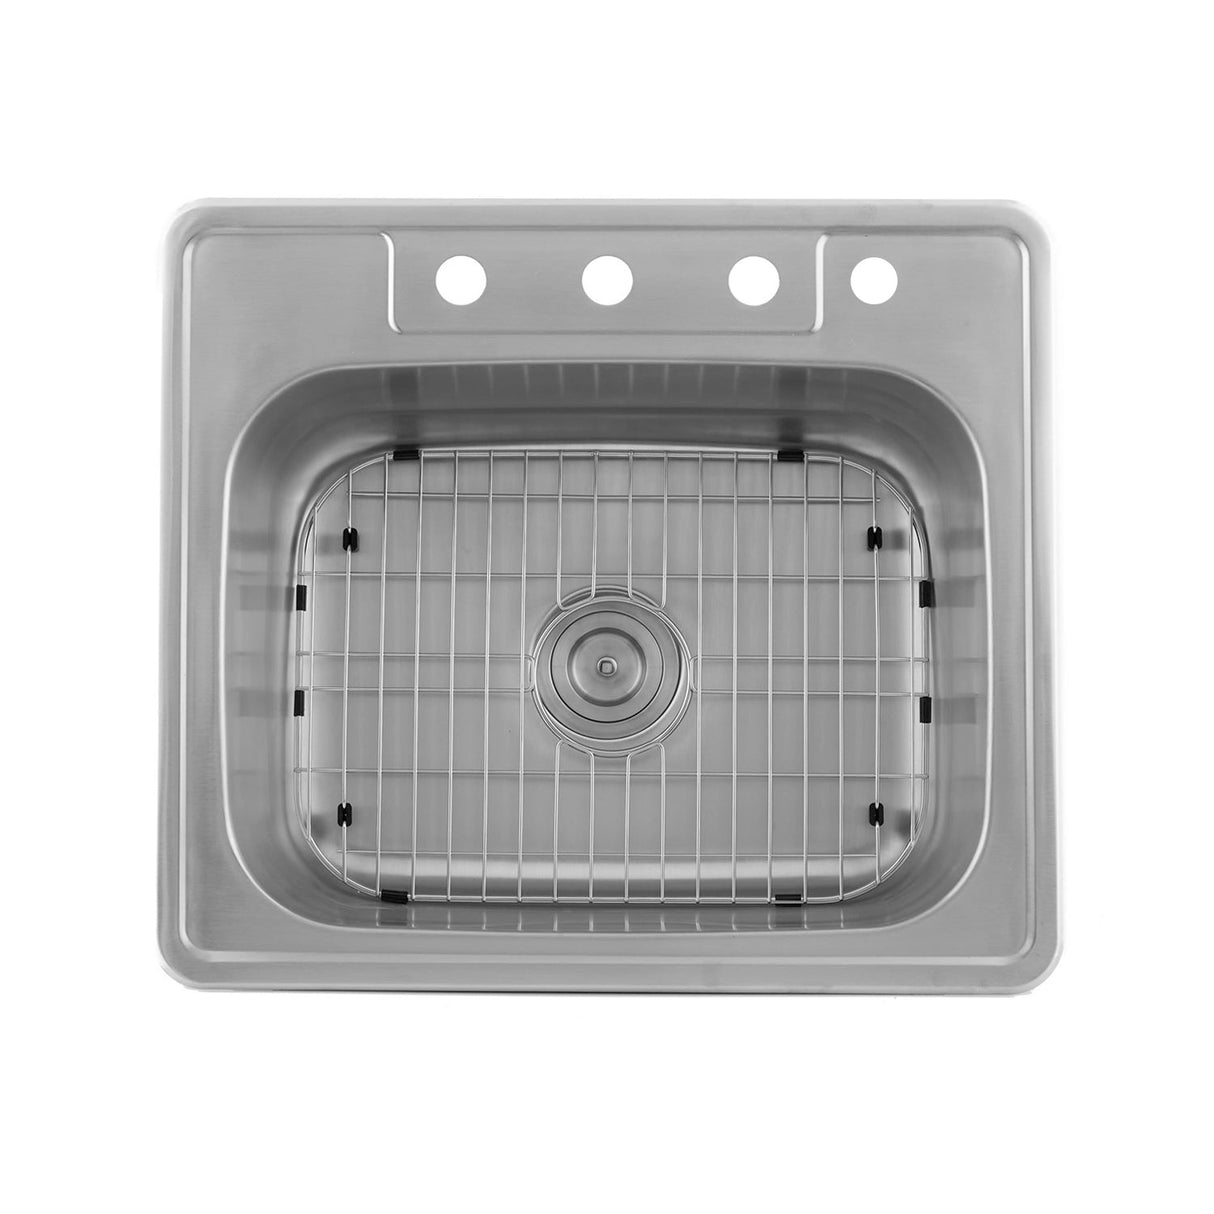 DAX Stainless Steel Single Bowl Top Mount Kitchen Sink, Brushed Stainless Steel DAX-OM-2522